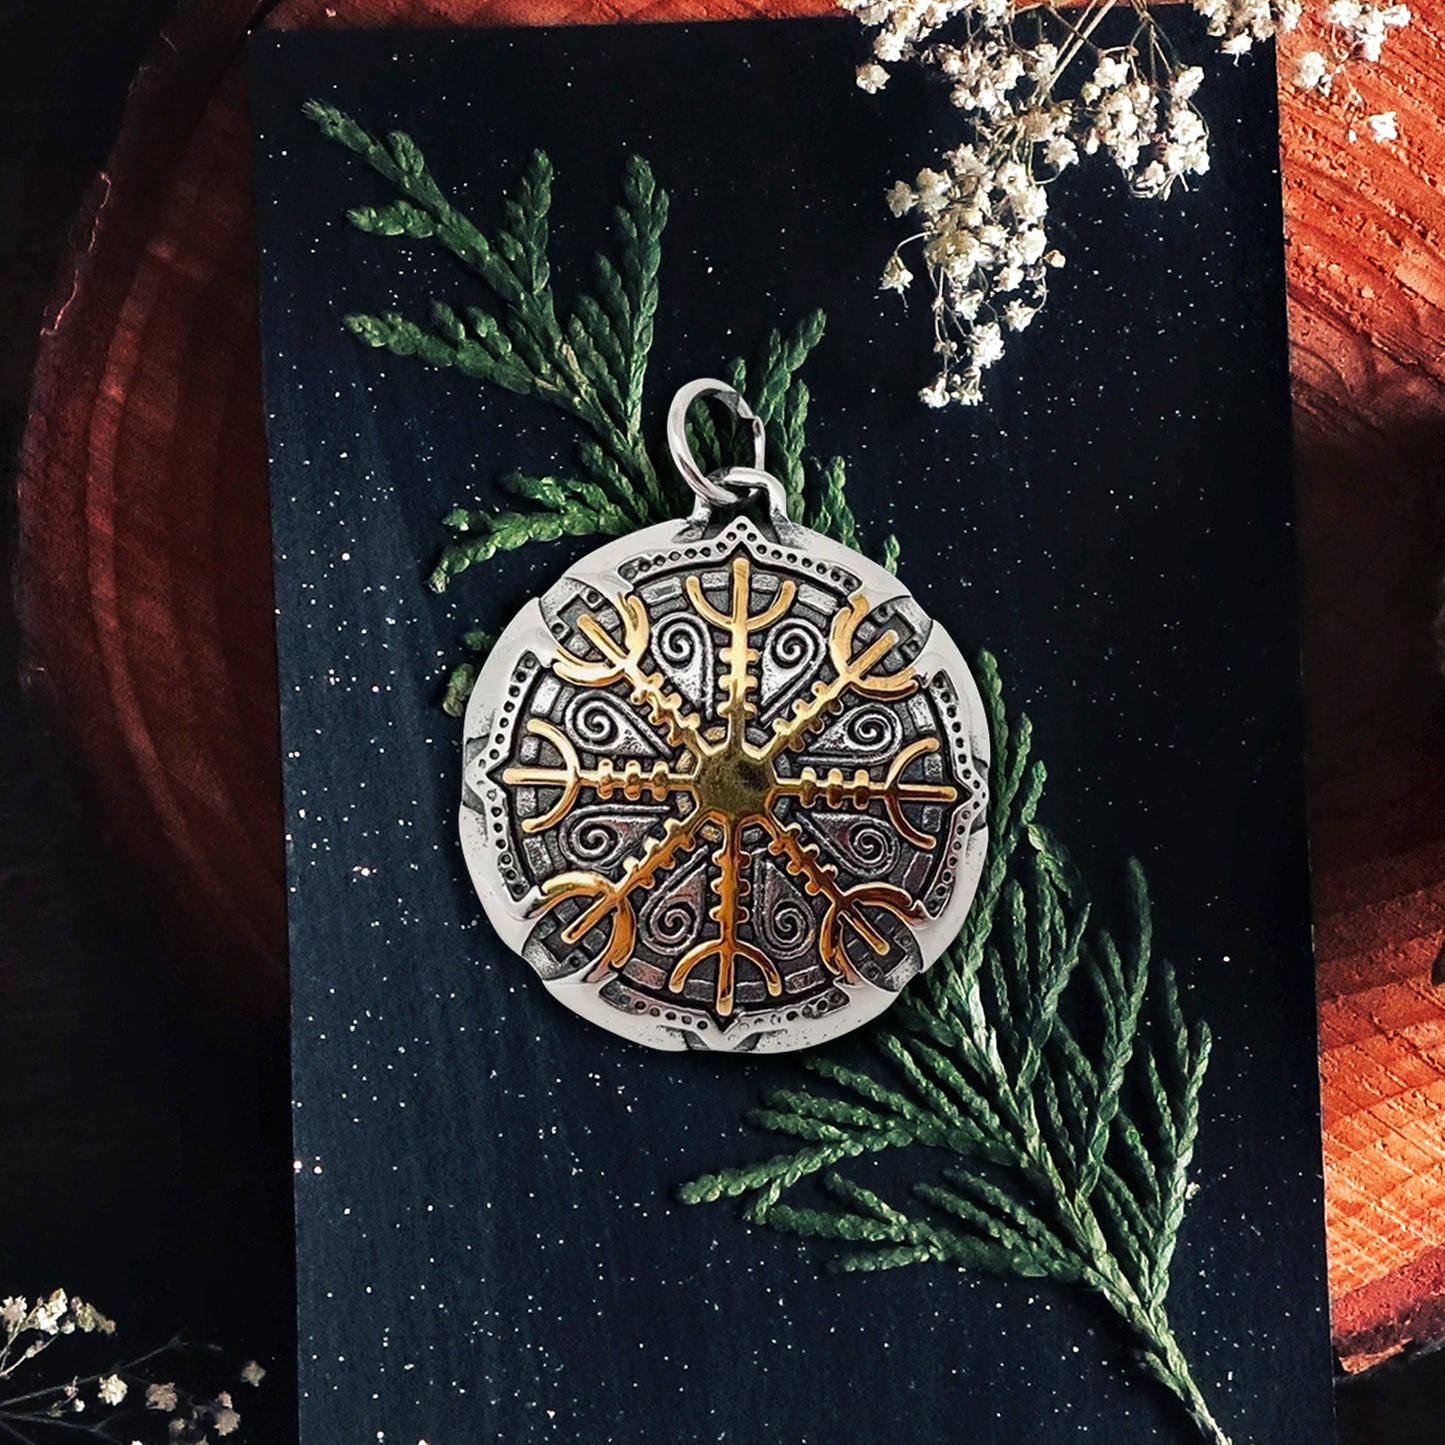 A stainless steel pendant decorated with Nordic-style runes, against a blue cloth speckled with white dots. The front has eight trident-shaped sections, plated in gold. At the top of the pendant is a metal loop, to hand on a chain. Behind the pendant is a sprig of green herbs. In the background is the flat circle of a cut tree trunk.